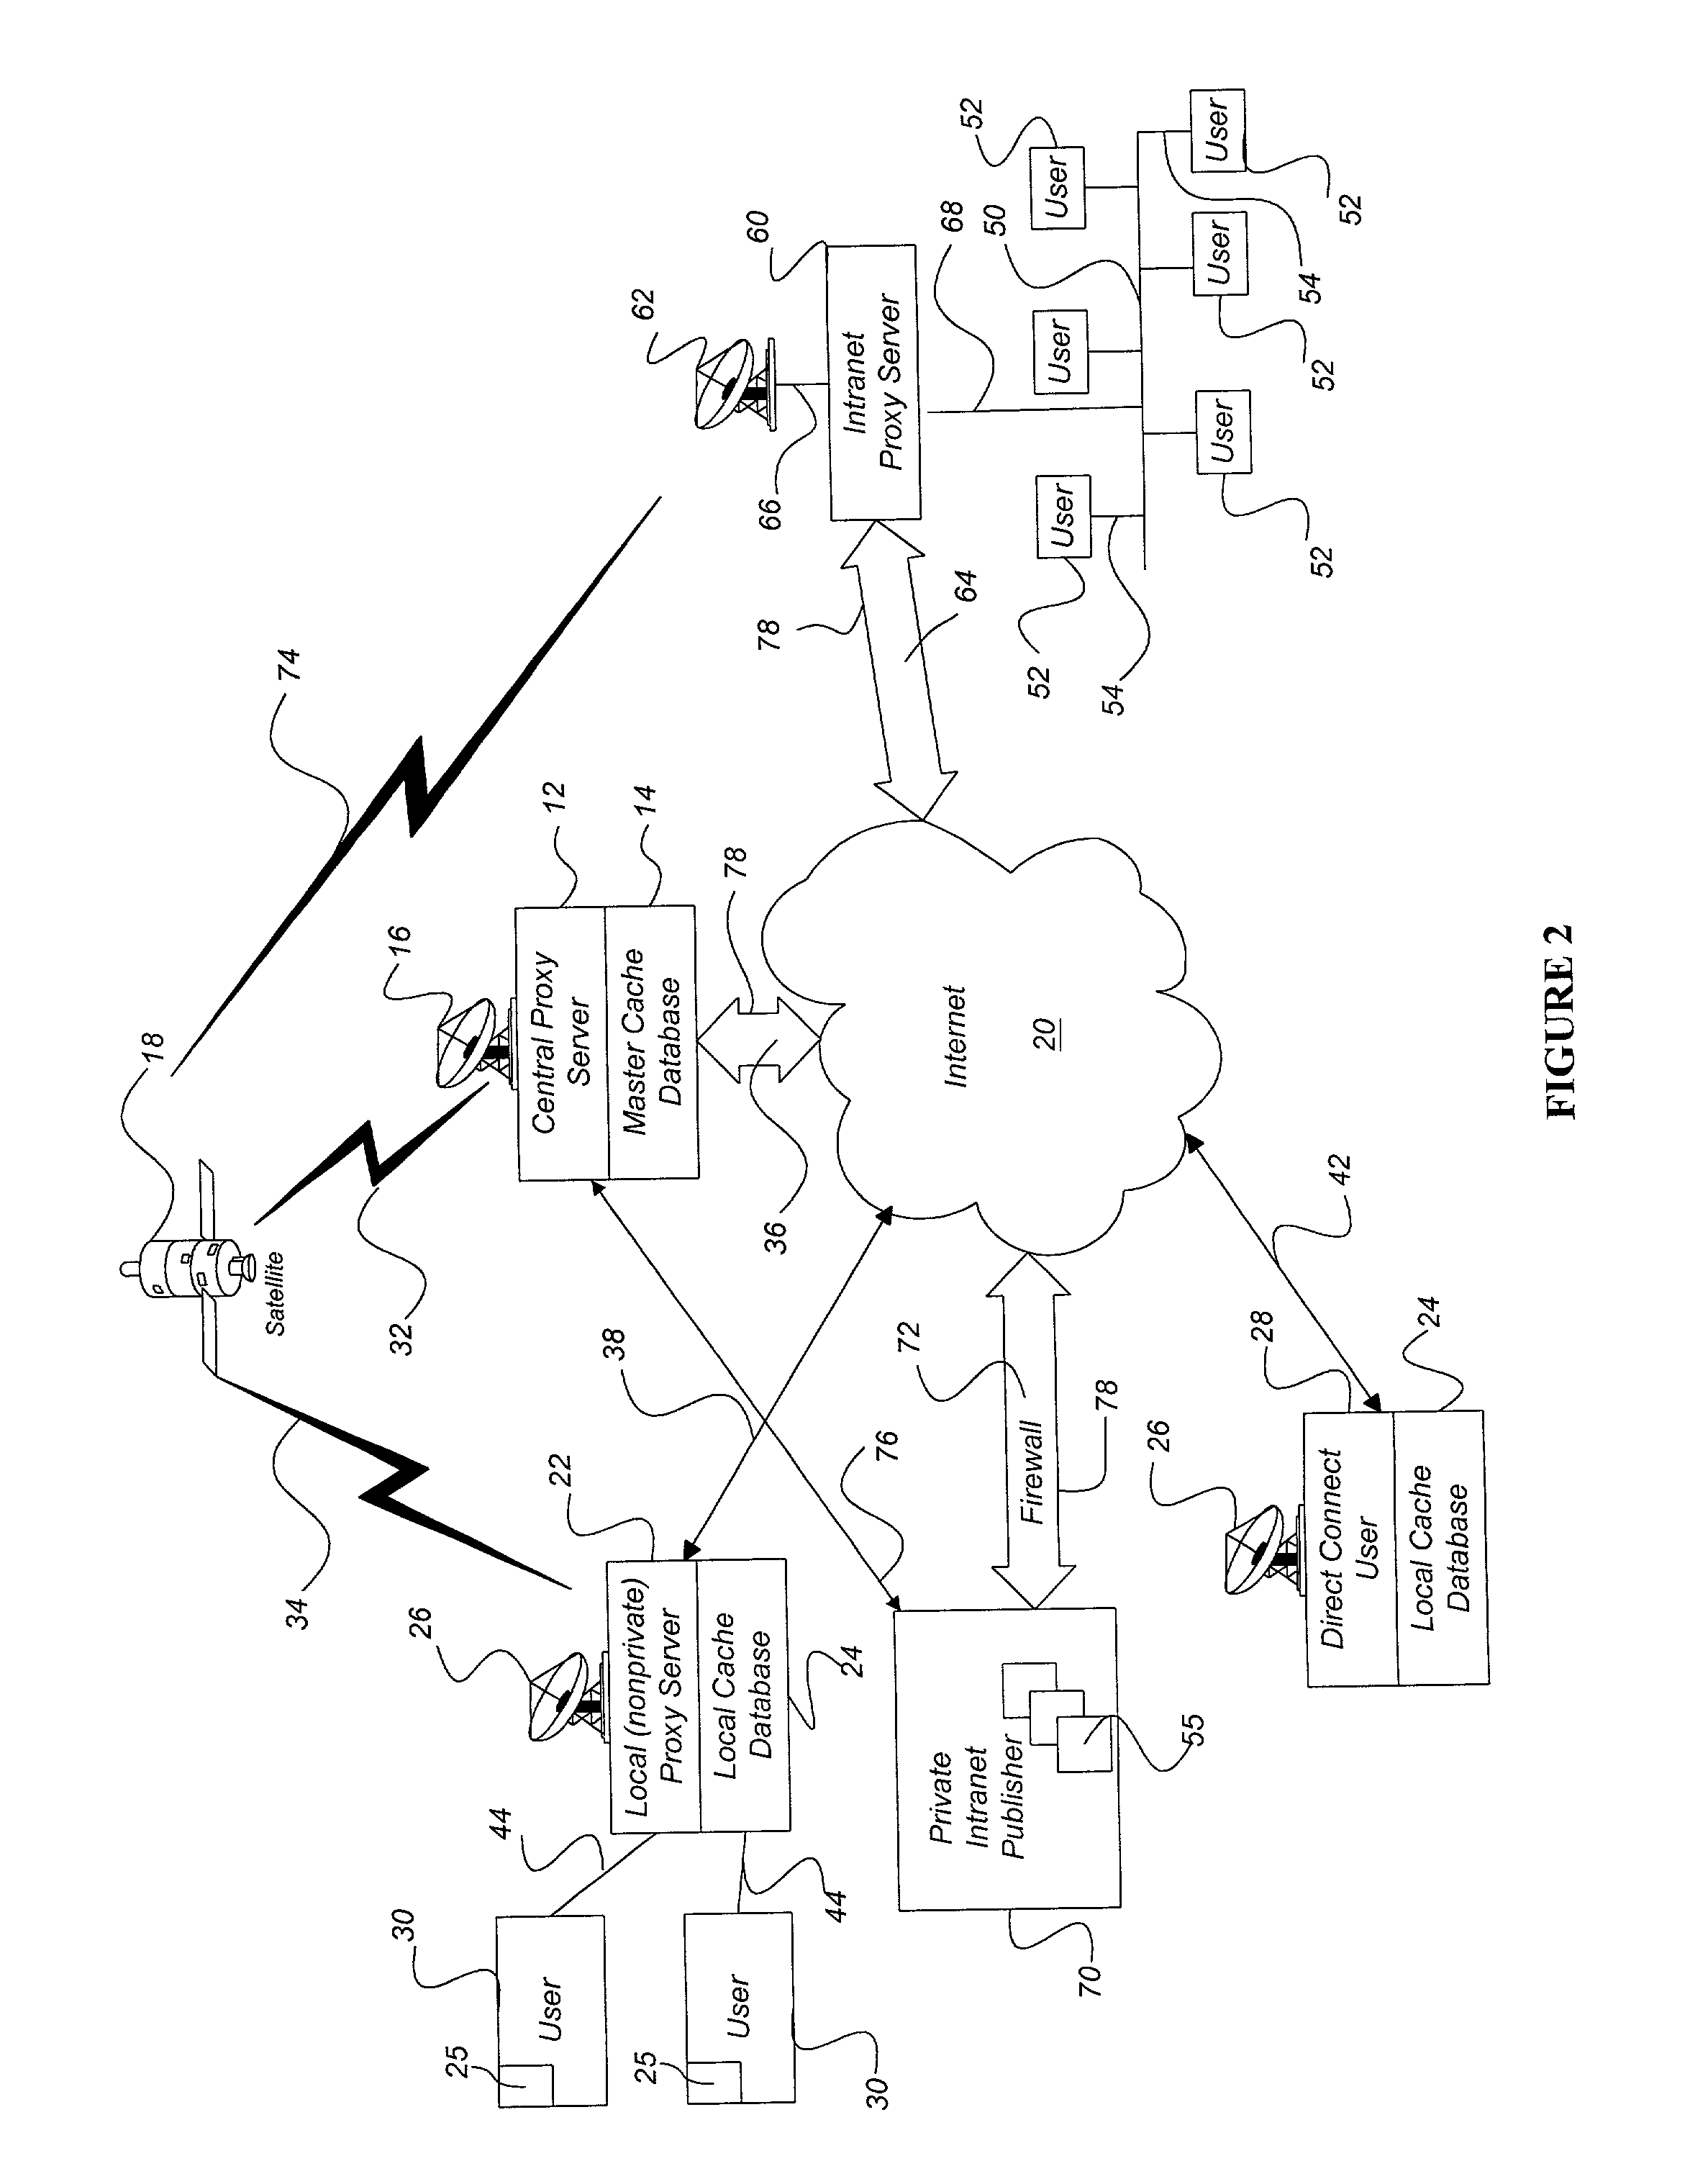 Internet content delivery acceleration system employing a hybrid content selection scheme